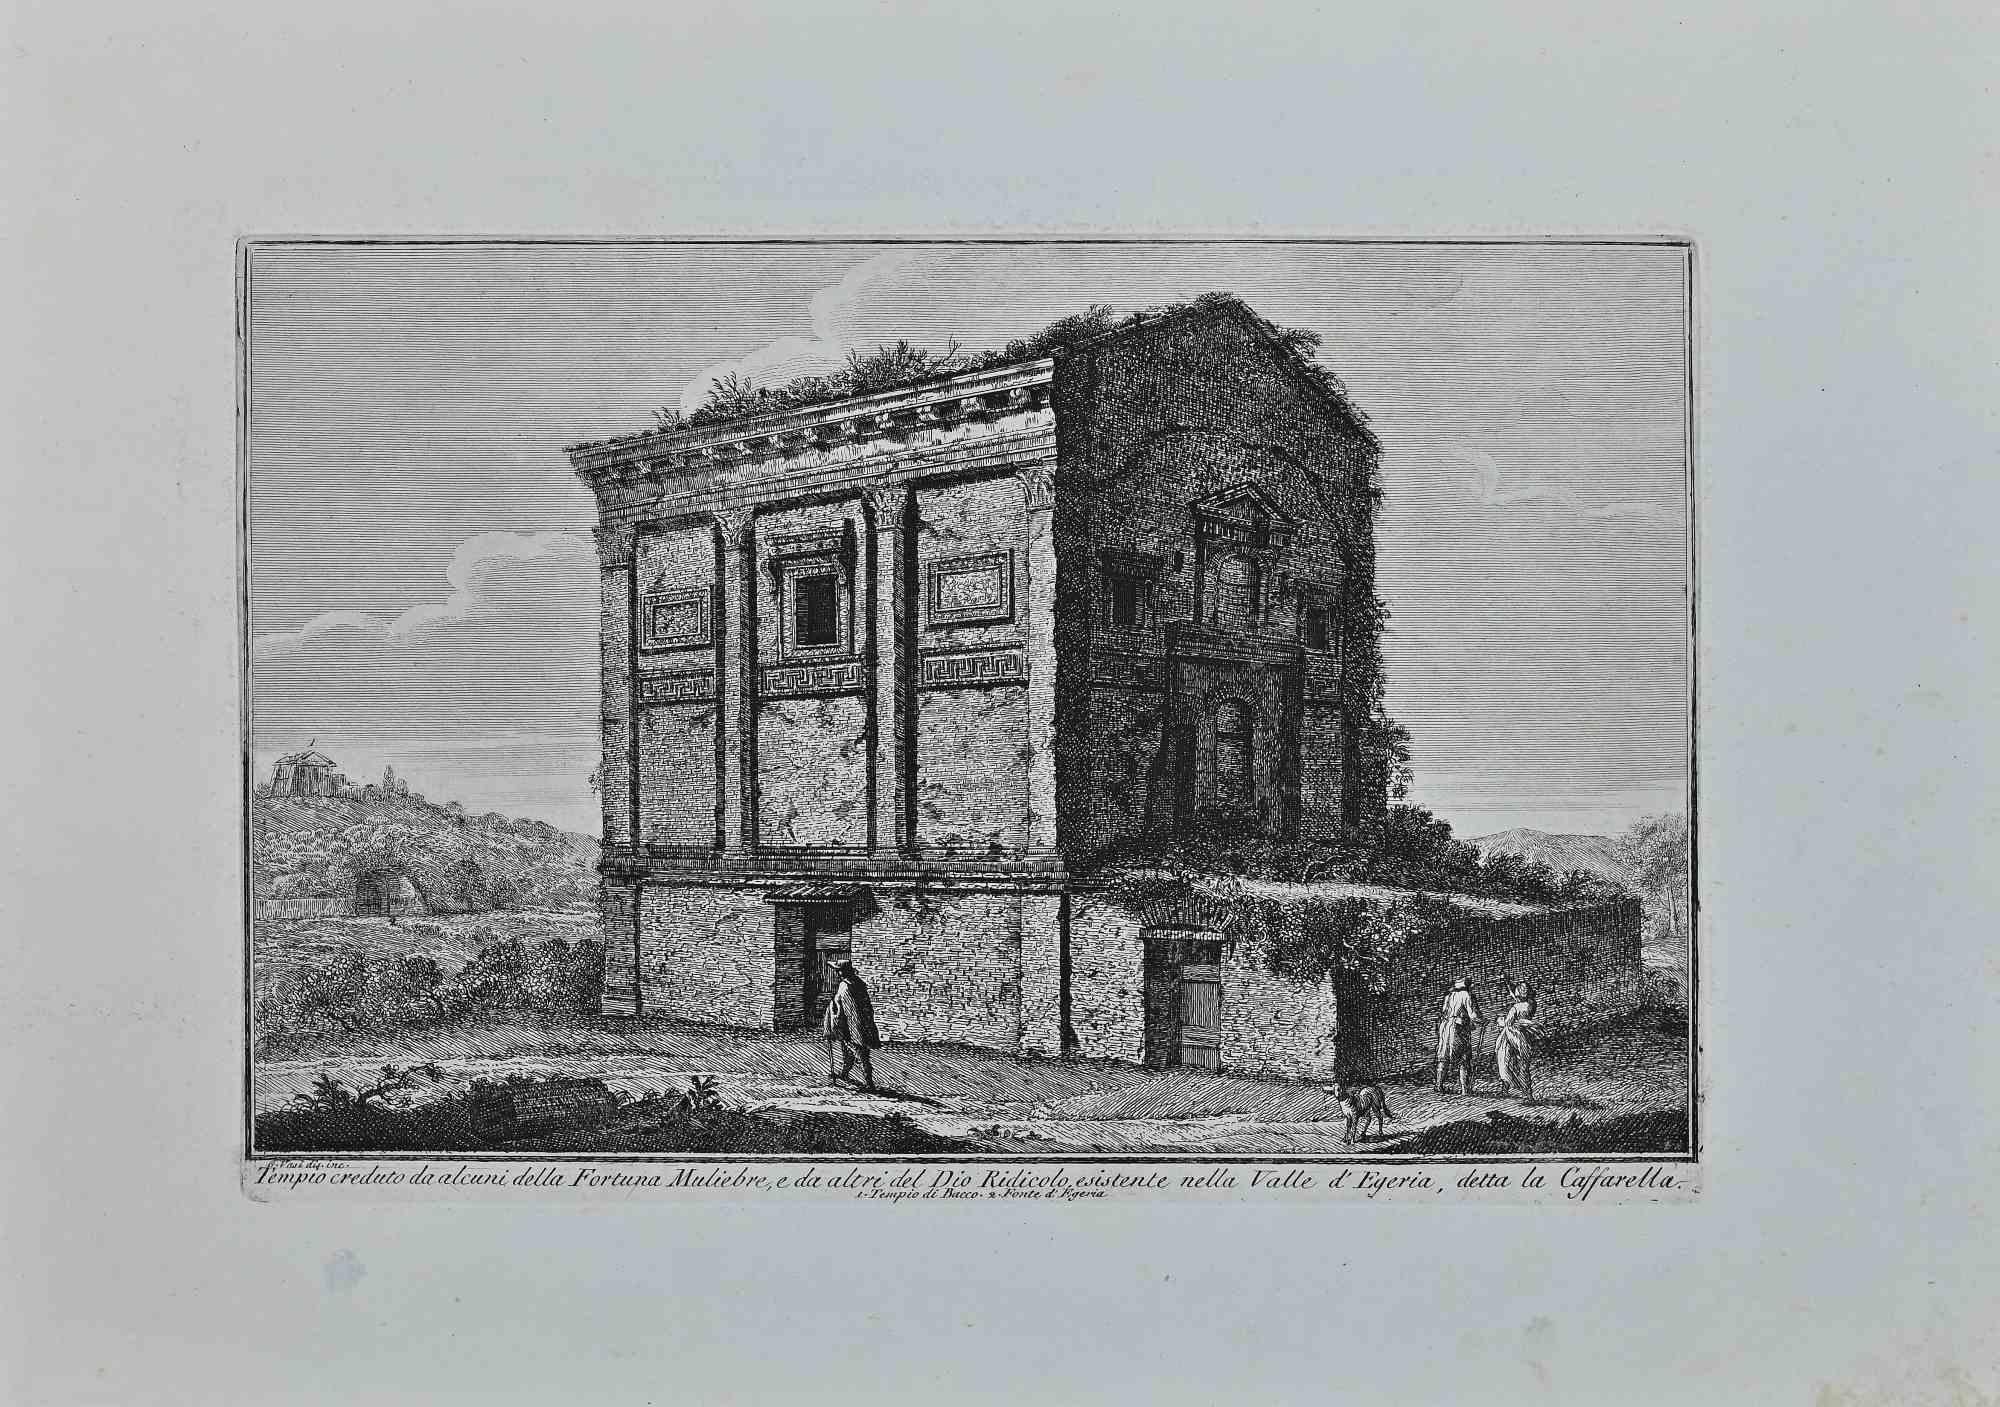 Tempio in Caffarella is an original etching of the Late 18th century realized by Giuseppe Vasi.

Signed and titled on plate lower margin. 

Good conditions.

Giuseppe Vasi  (Corleone,1710 - Rome, 1782) was an engraver, architect, and landscape